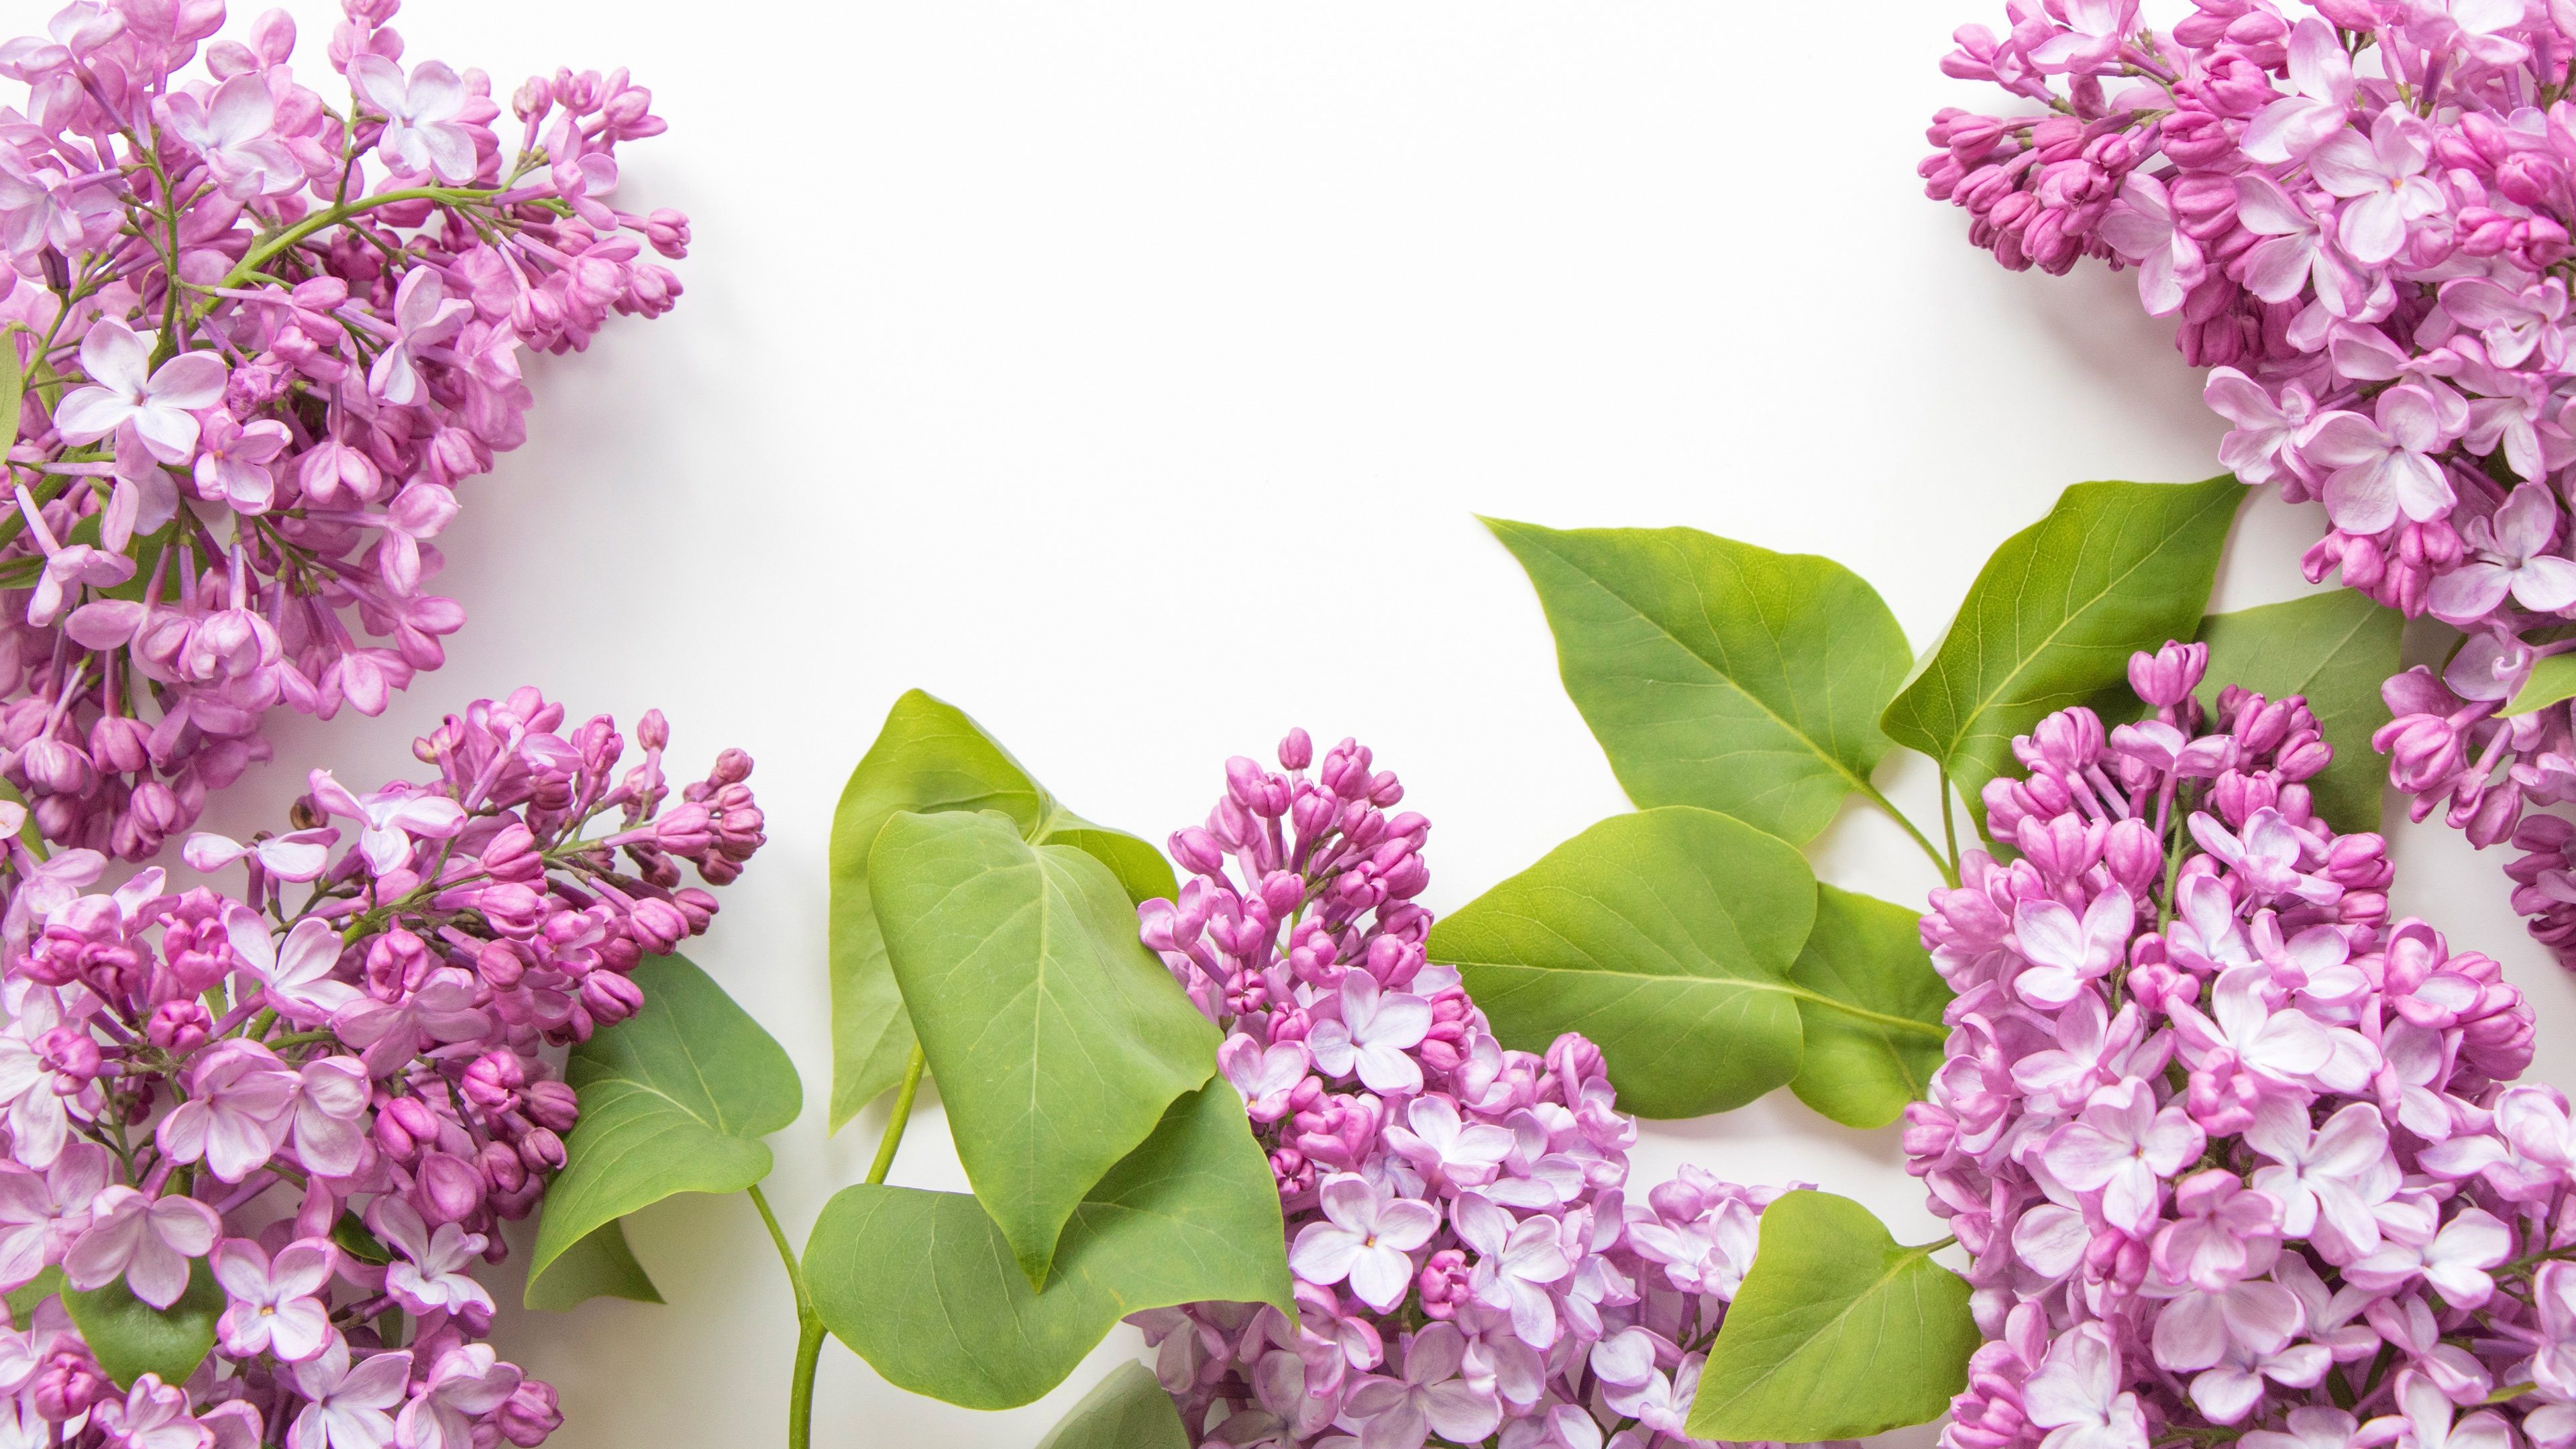 Lilac Photos Download The BEST Free Lilac Stock Photos  HD Images